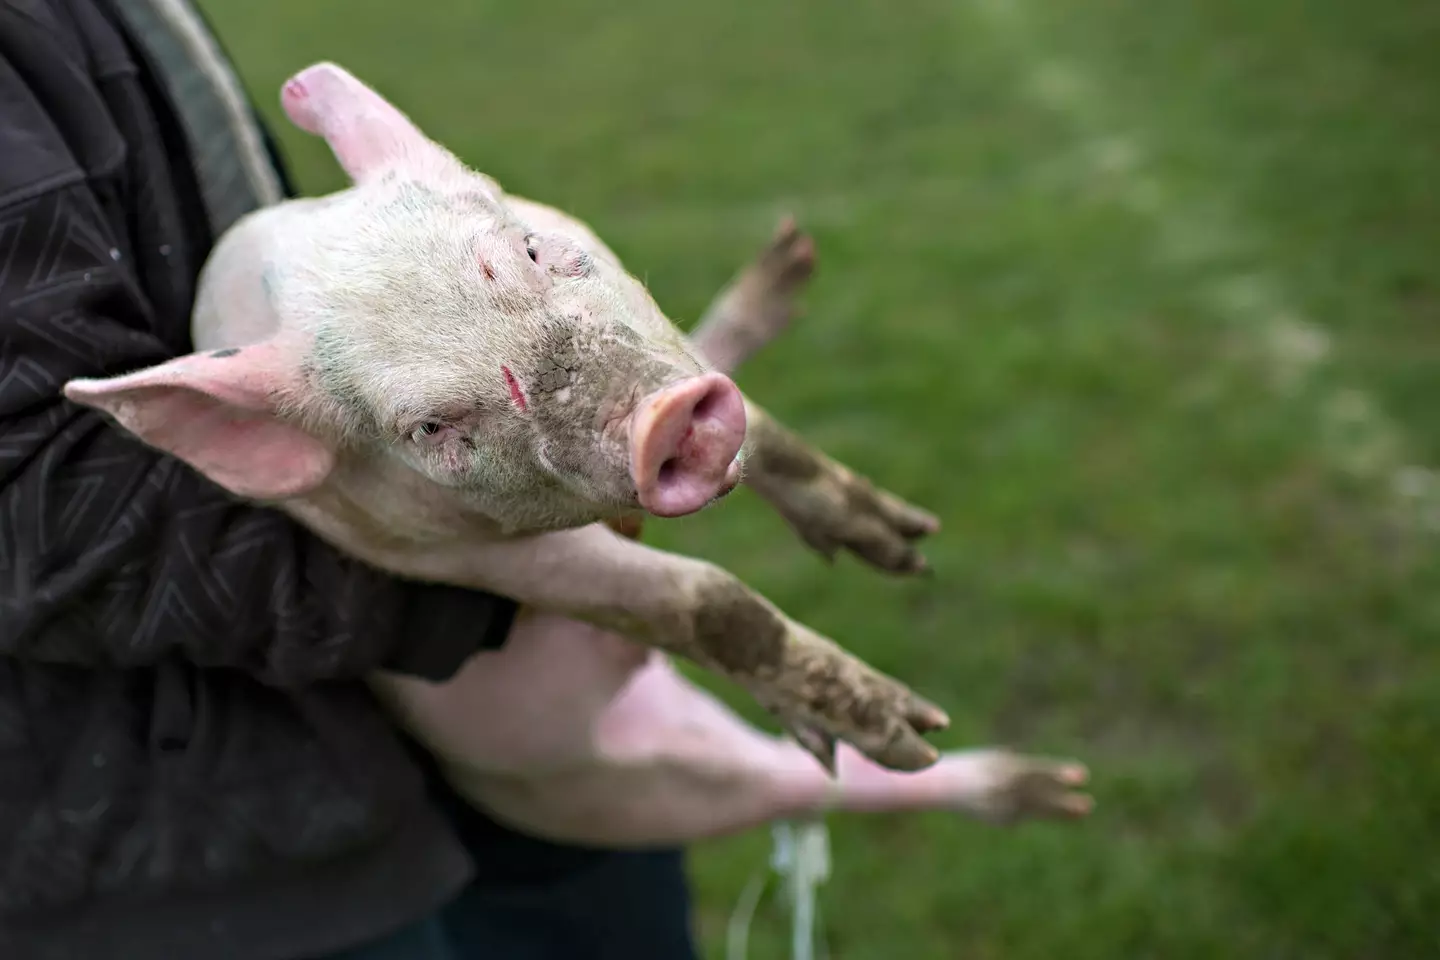 Pigs are one of the most popular livestock animals to eat.